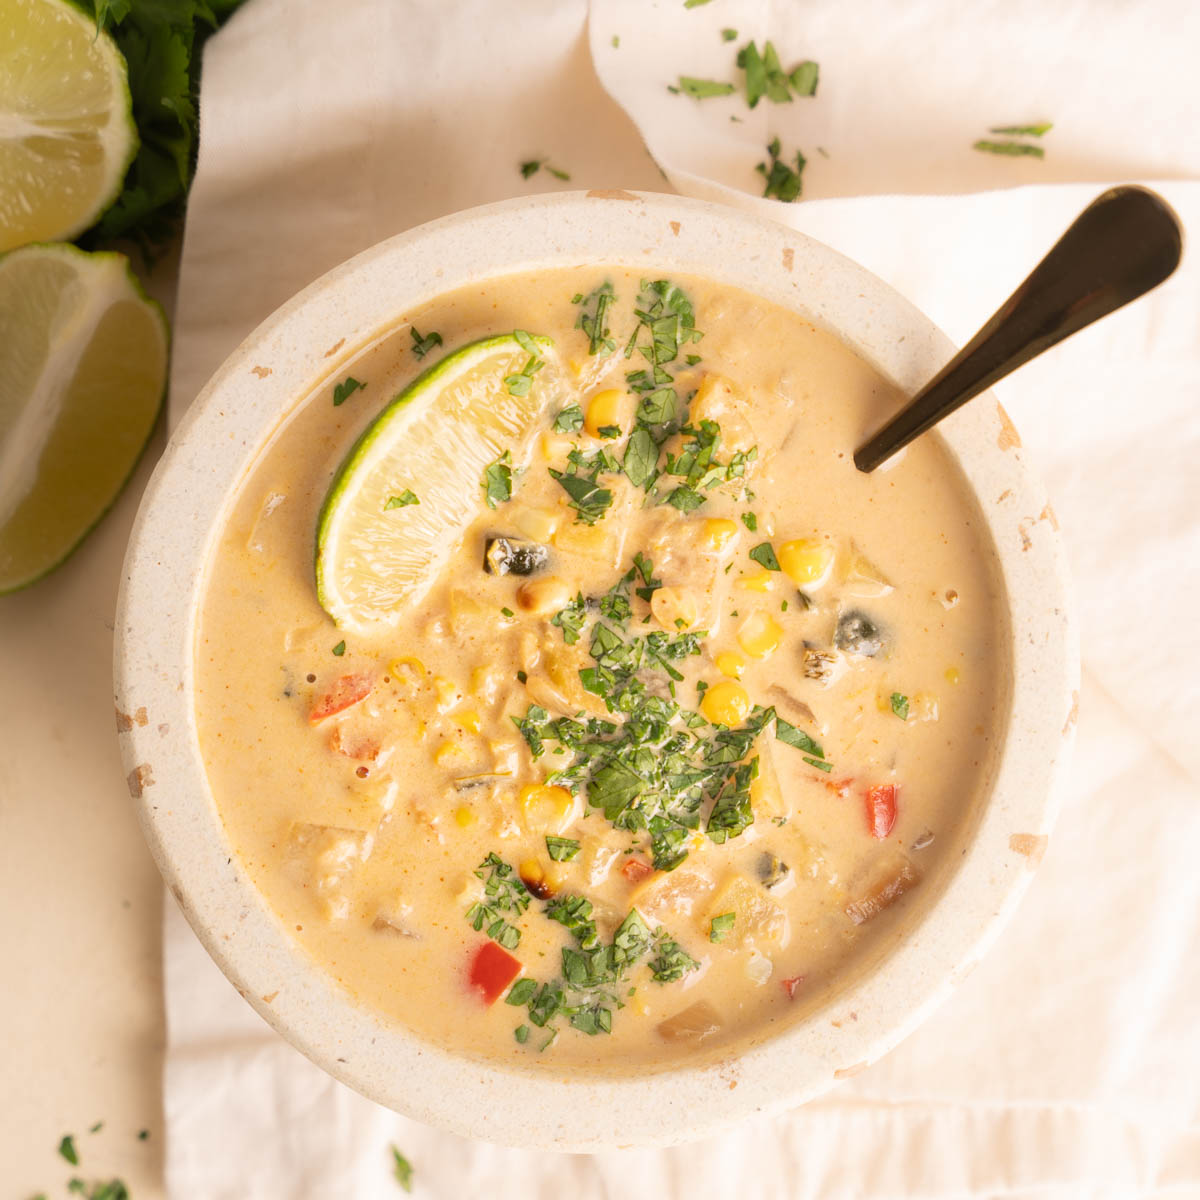 Creamy Panera Mexican Street Corn Soup top down image with spoon and a lime garnish with a sprinkling of fresh cilantro